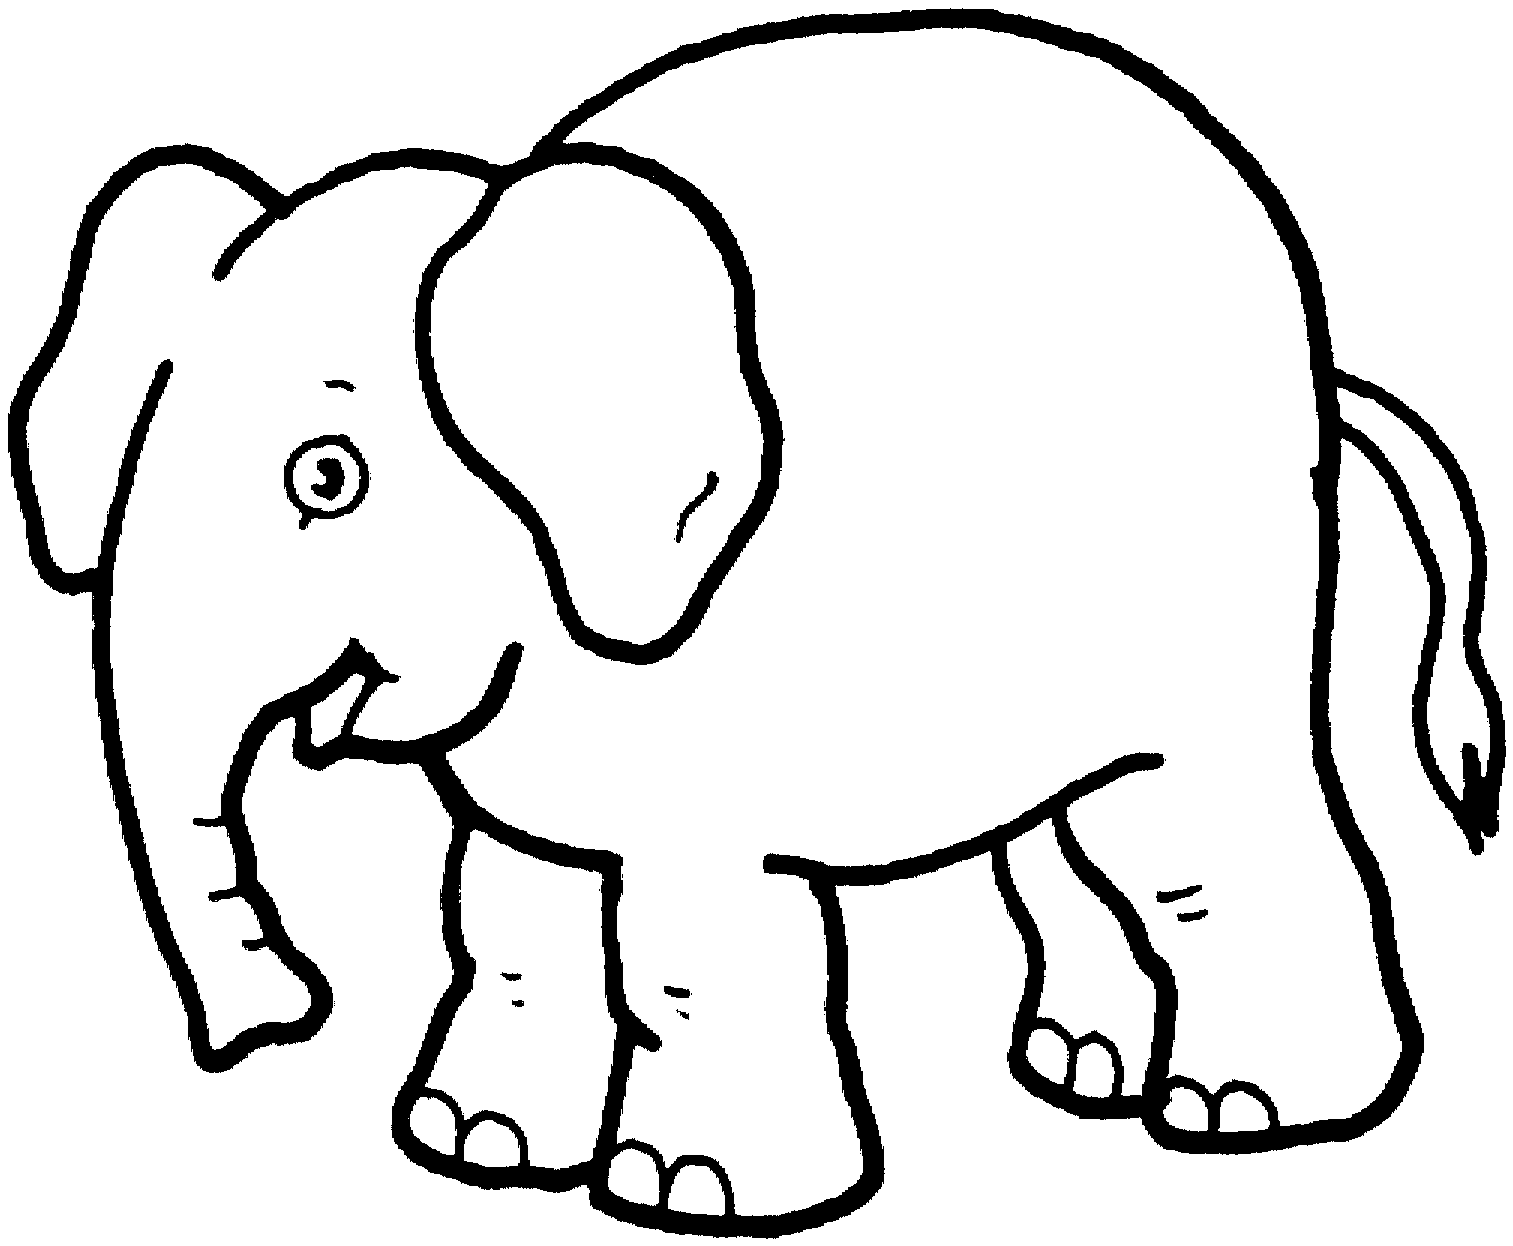 Elephants Pictures For Kids | Free Download Clip Art | Free Clip ...